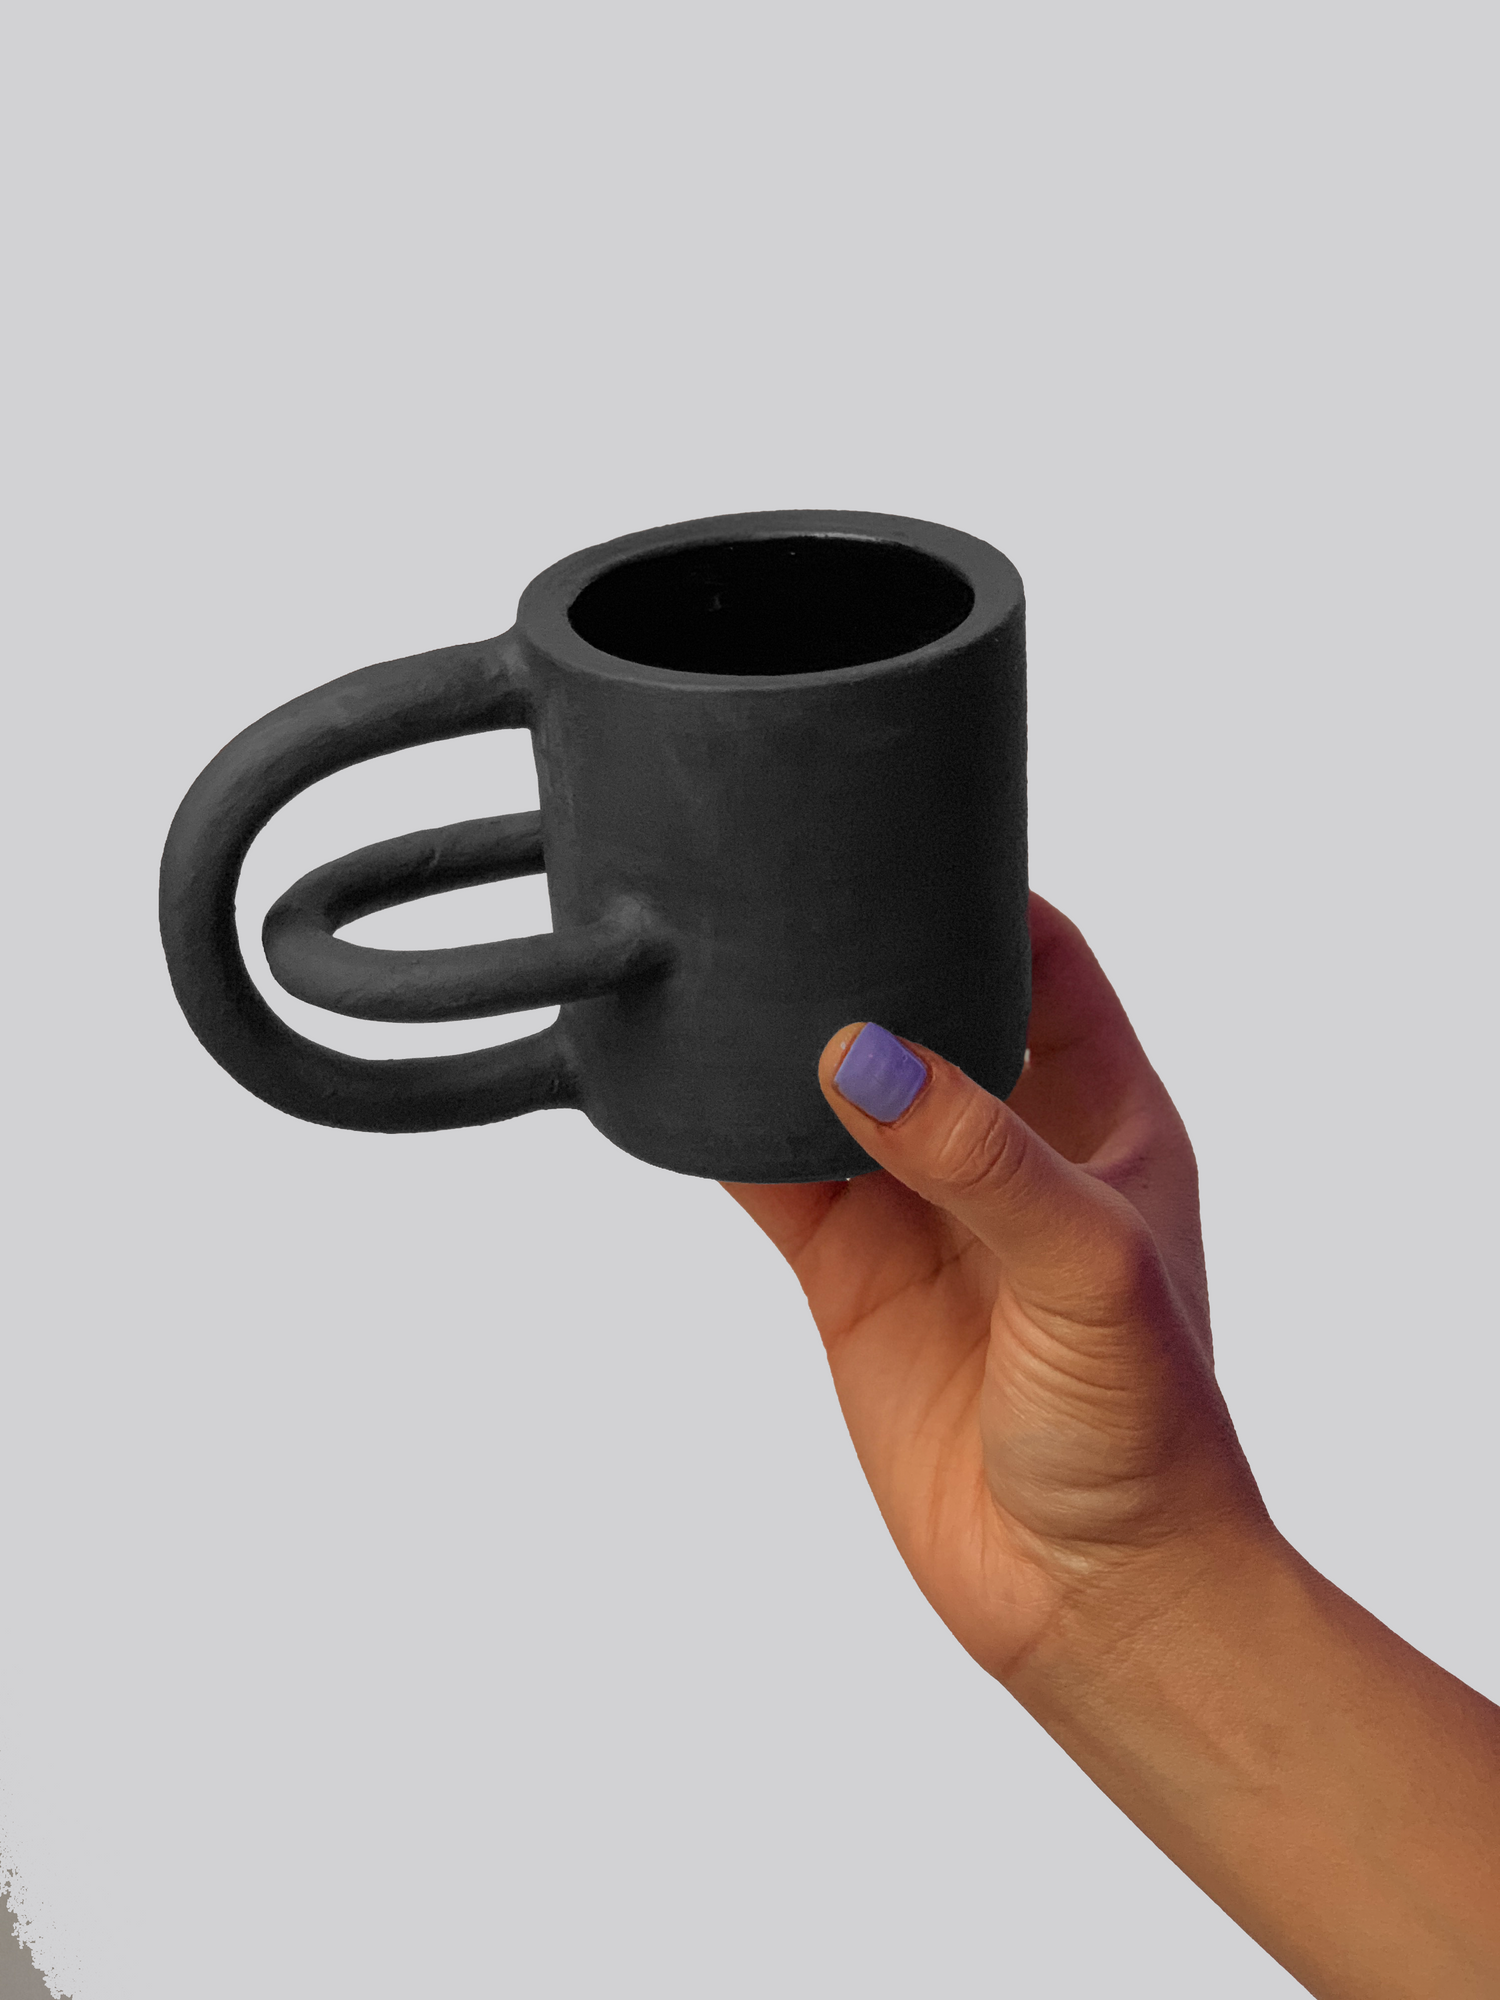 Black matte stoneware ceramic mug with intersecting arches as the handle.